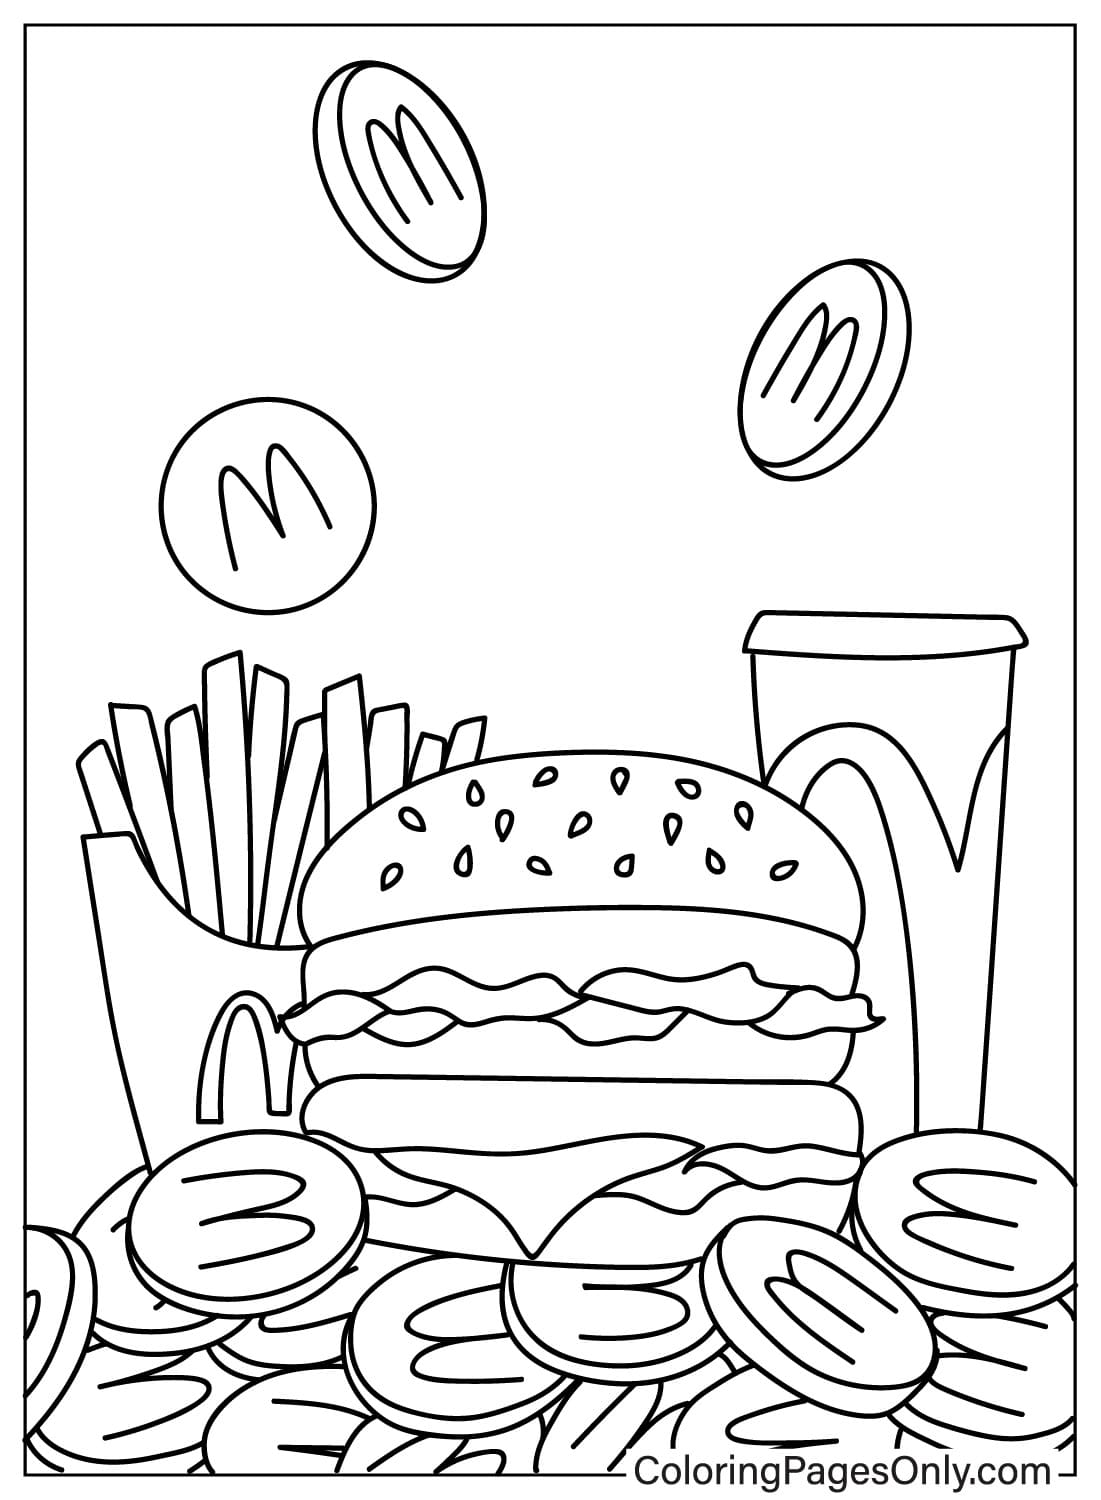 McDonalds Picture to Color from McDonald's